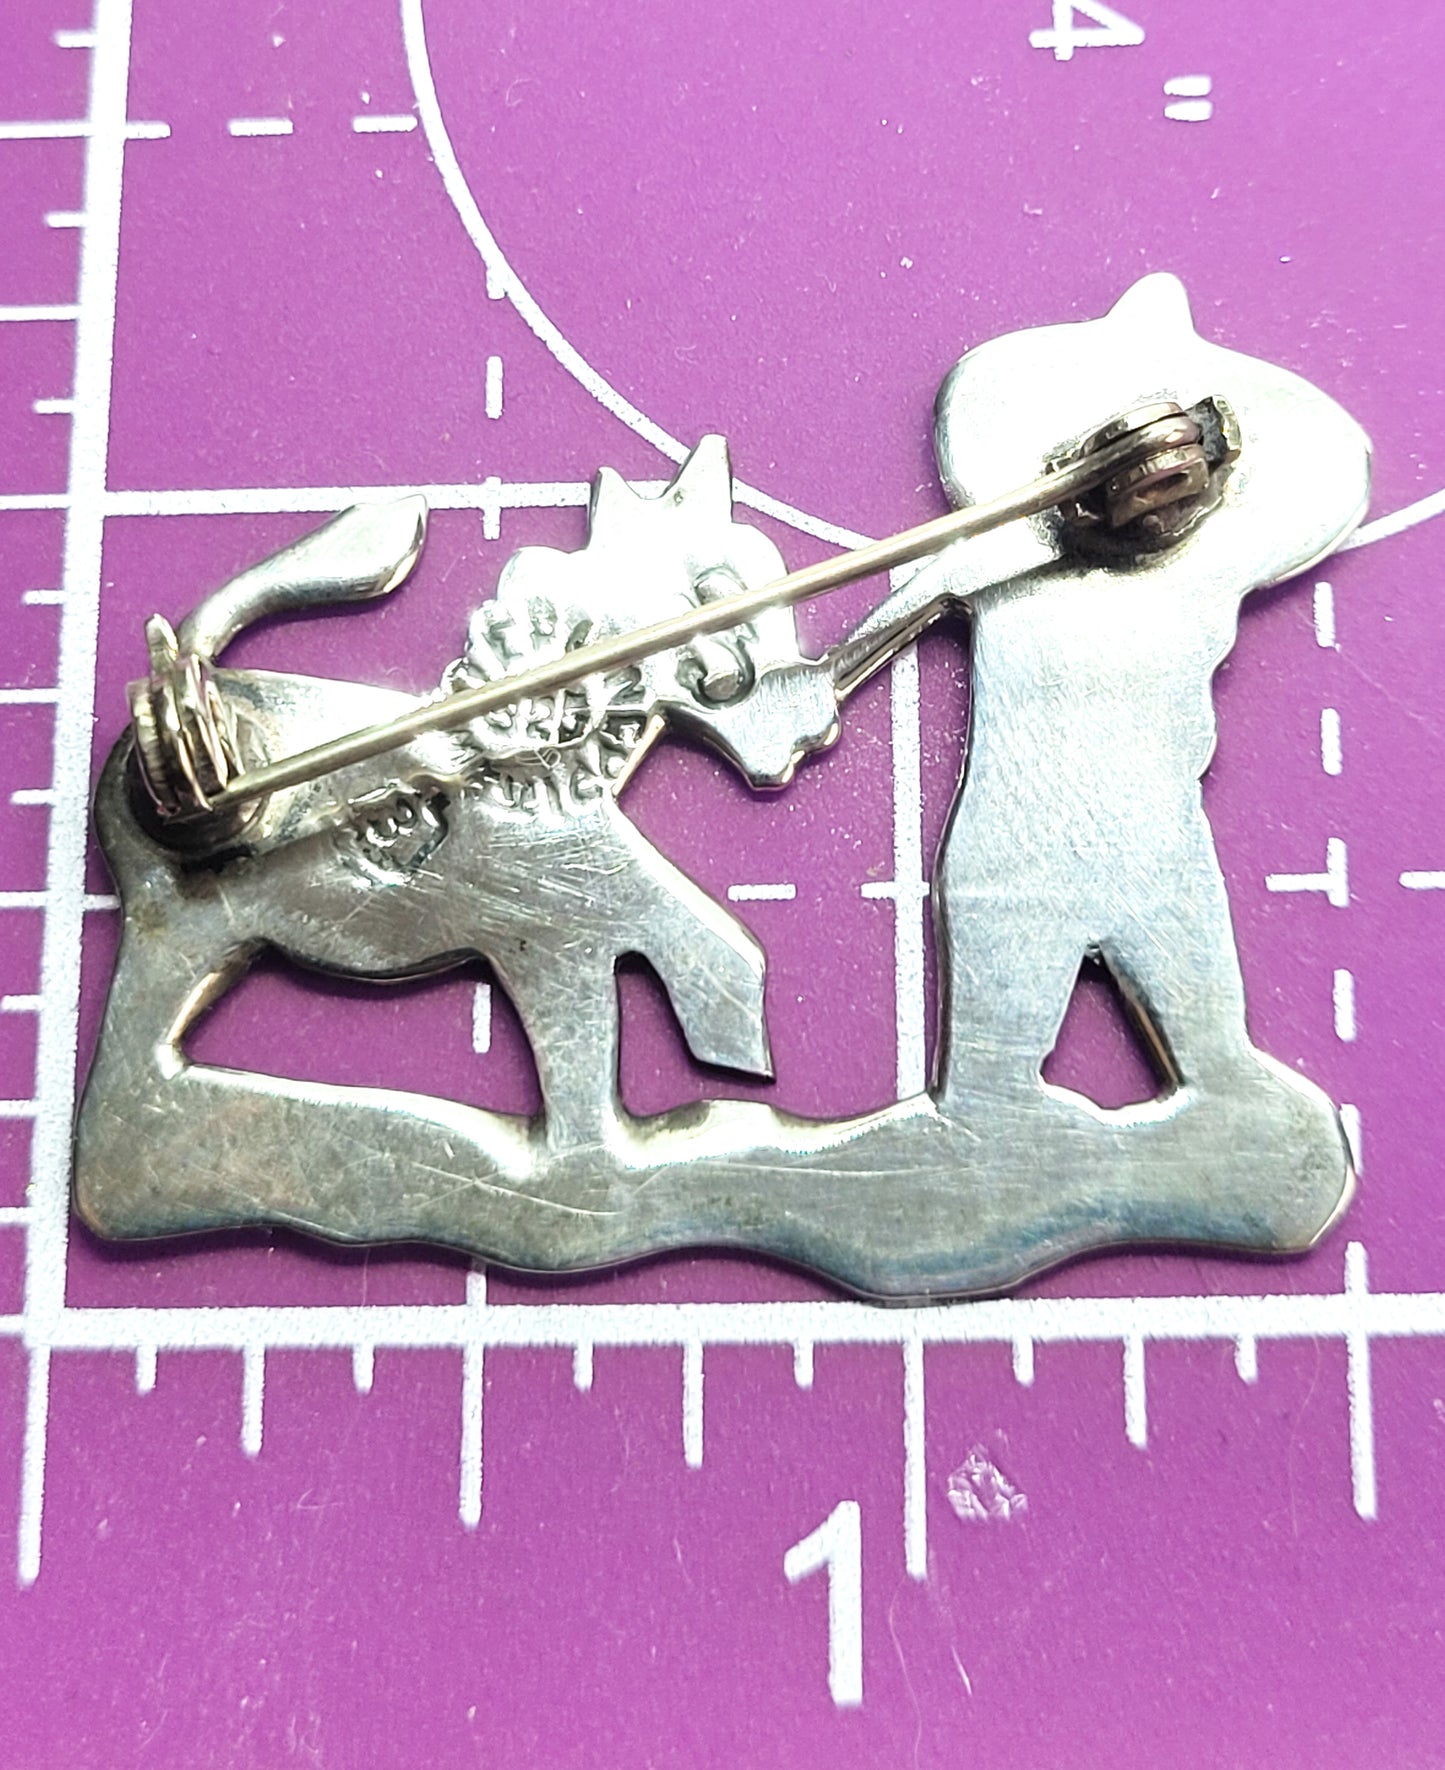 Jeronimo Fuentes Sterling Silver Enamel Brooch JF Mexico Taxco Donkey & Man